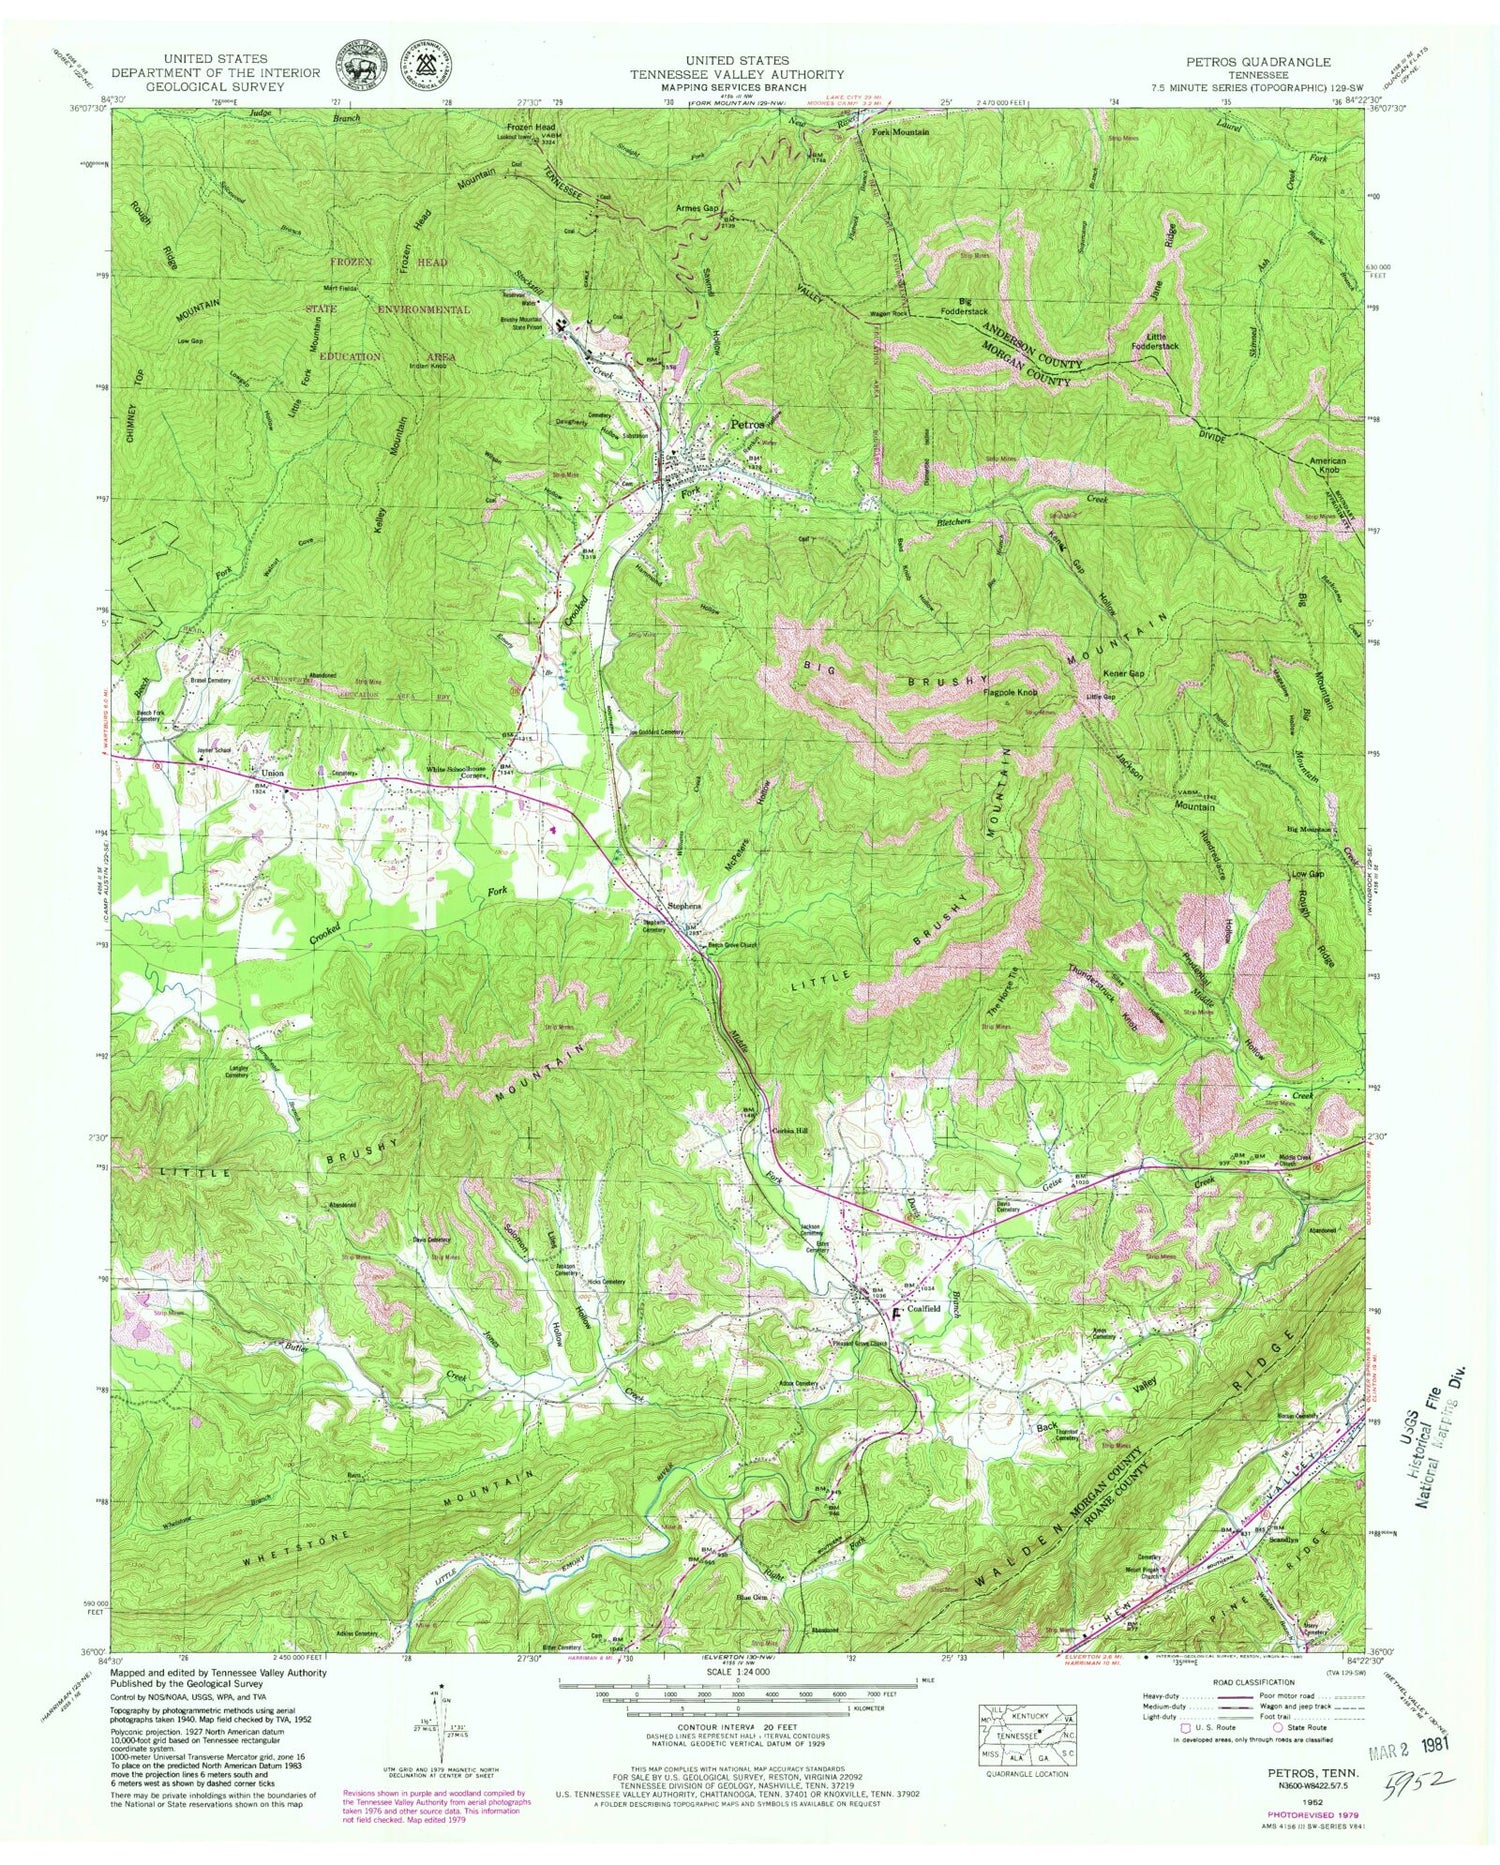 USGS Classic Petros Tennessee 7.5'x7.5' Topo Map Image